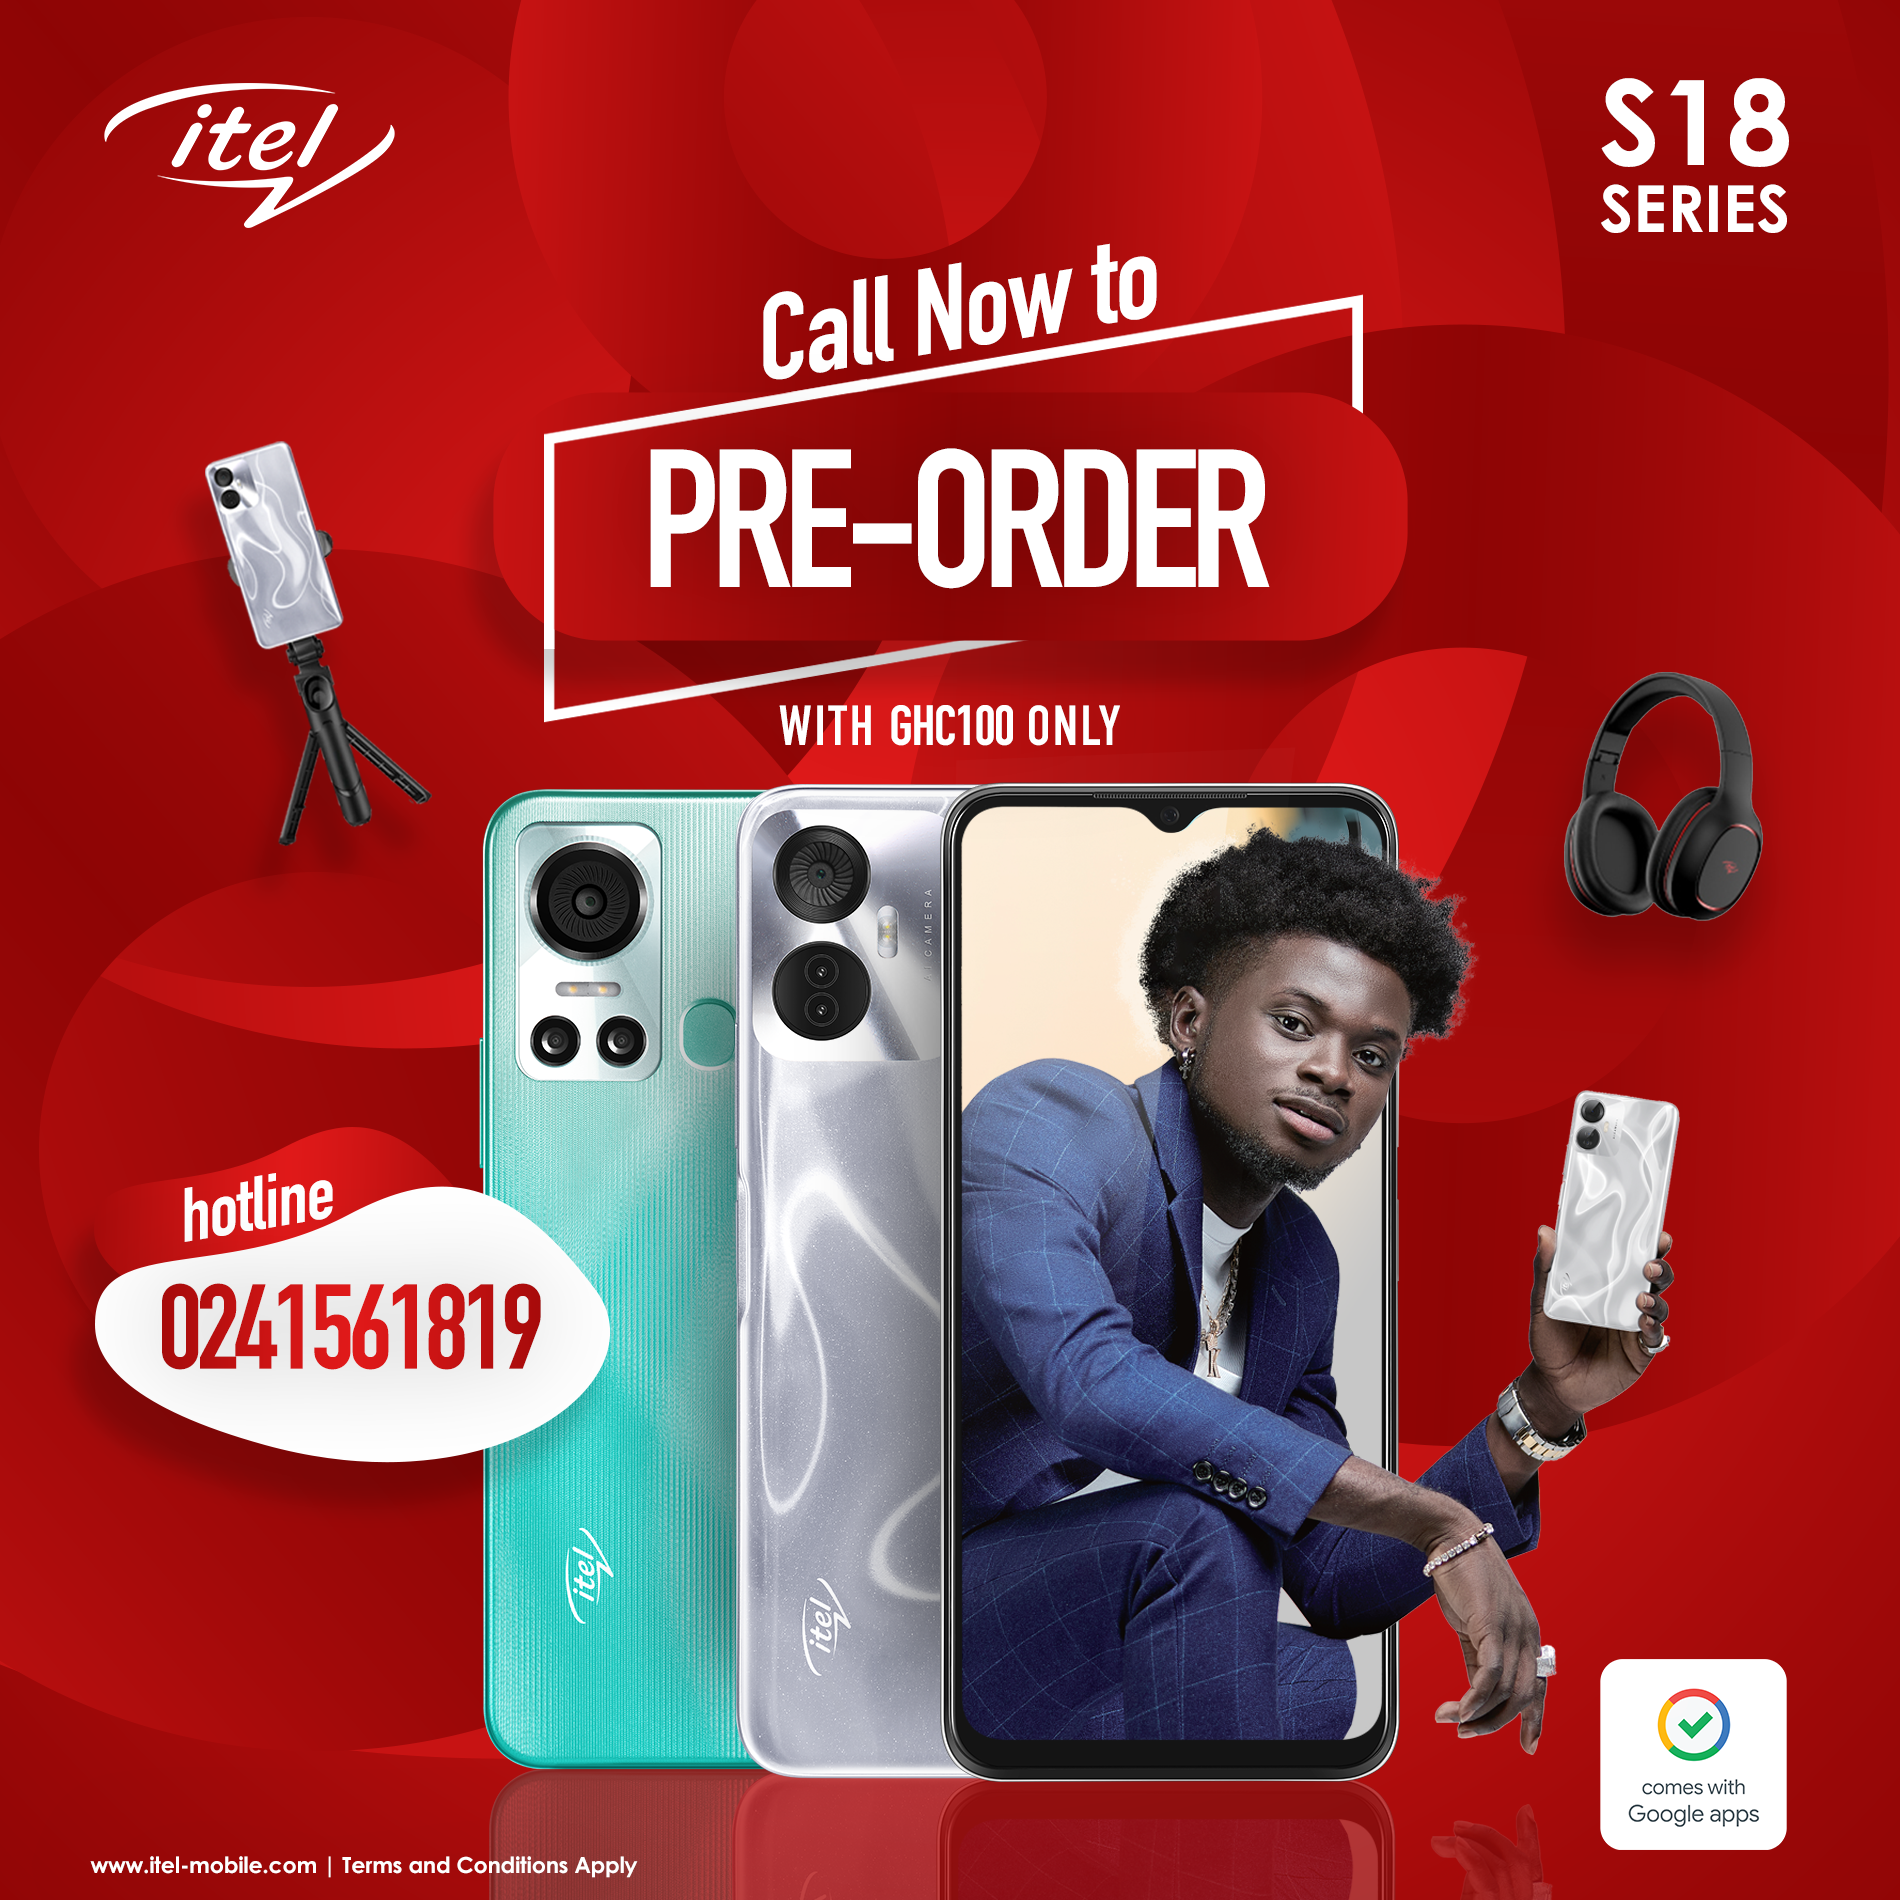 PRE-ORDER ITEL S18 AND WIN AMAZING GIFTS INSTANTLY